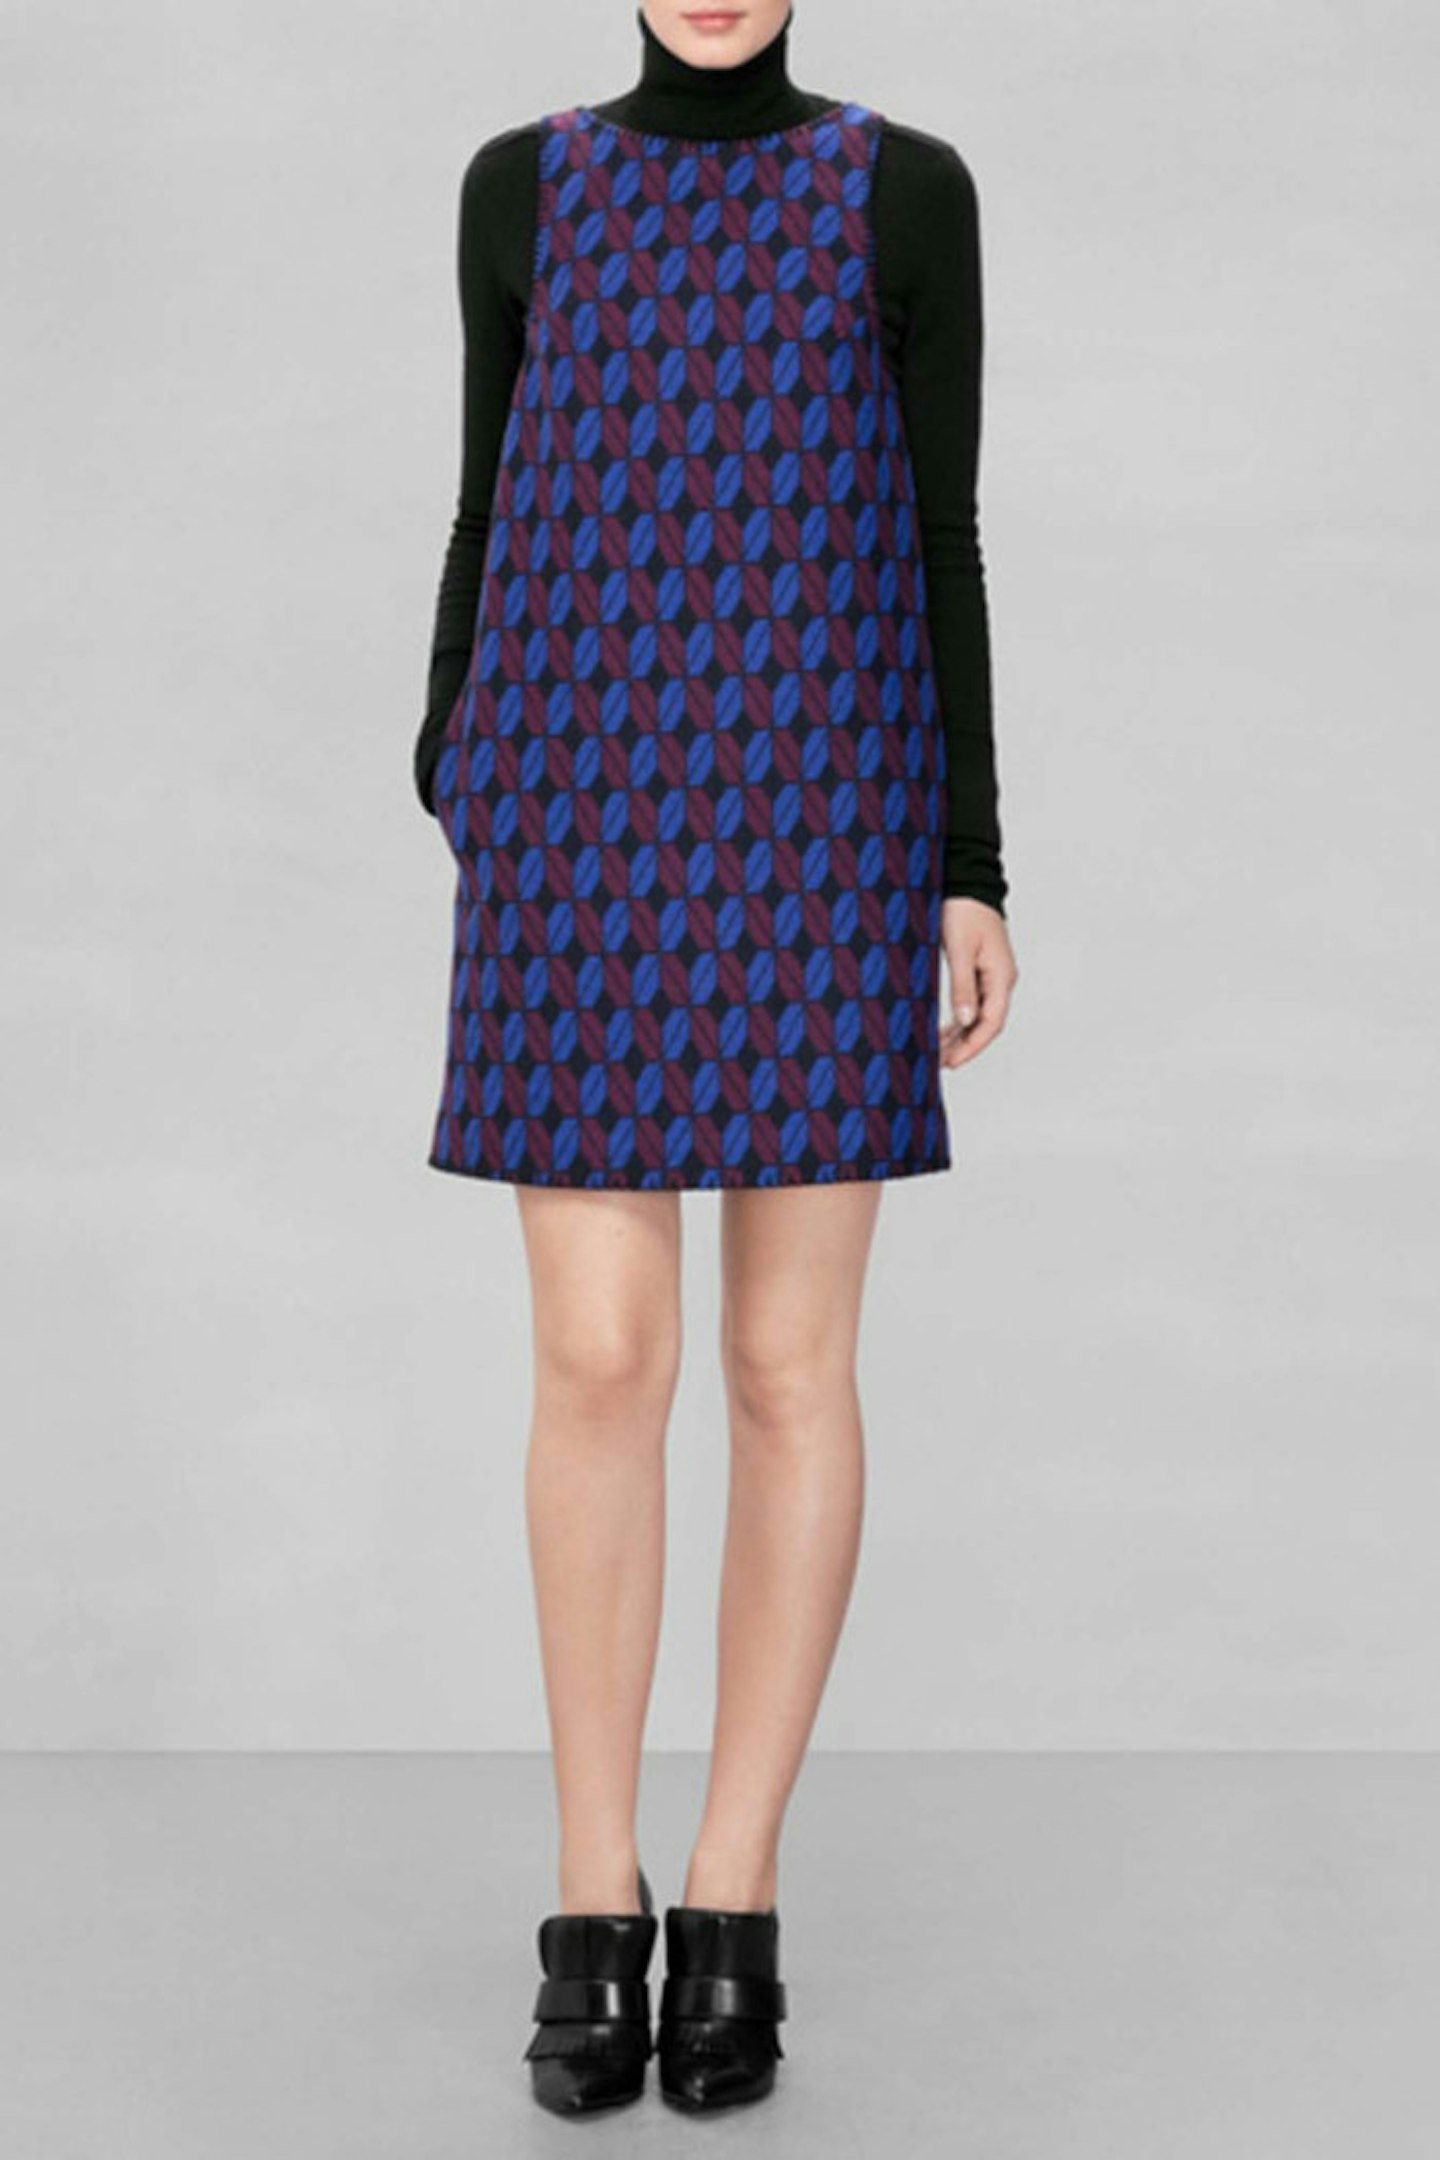 5. Graphic Jaquard Dress, £79, & Other Stories